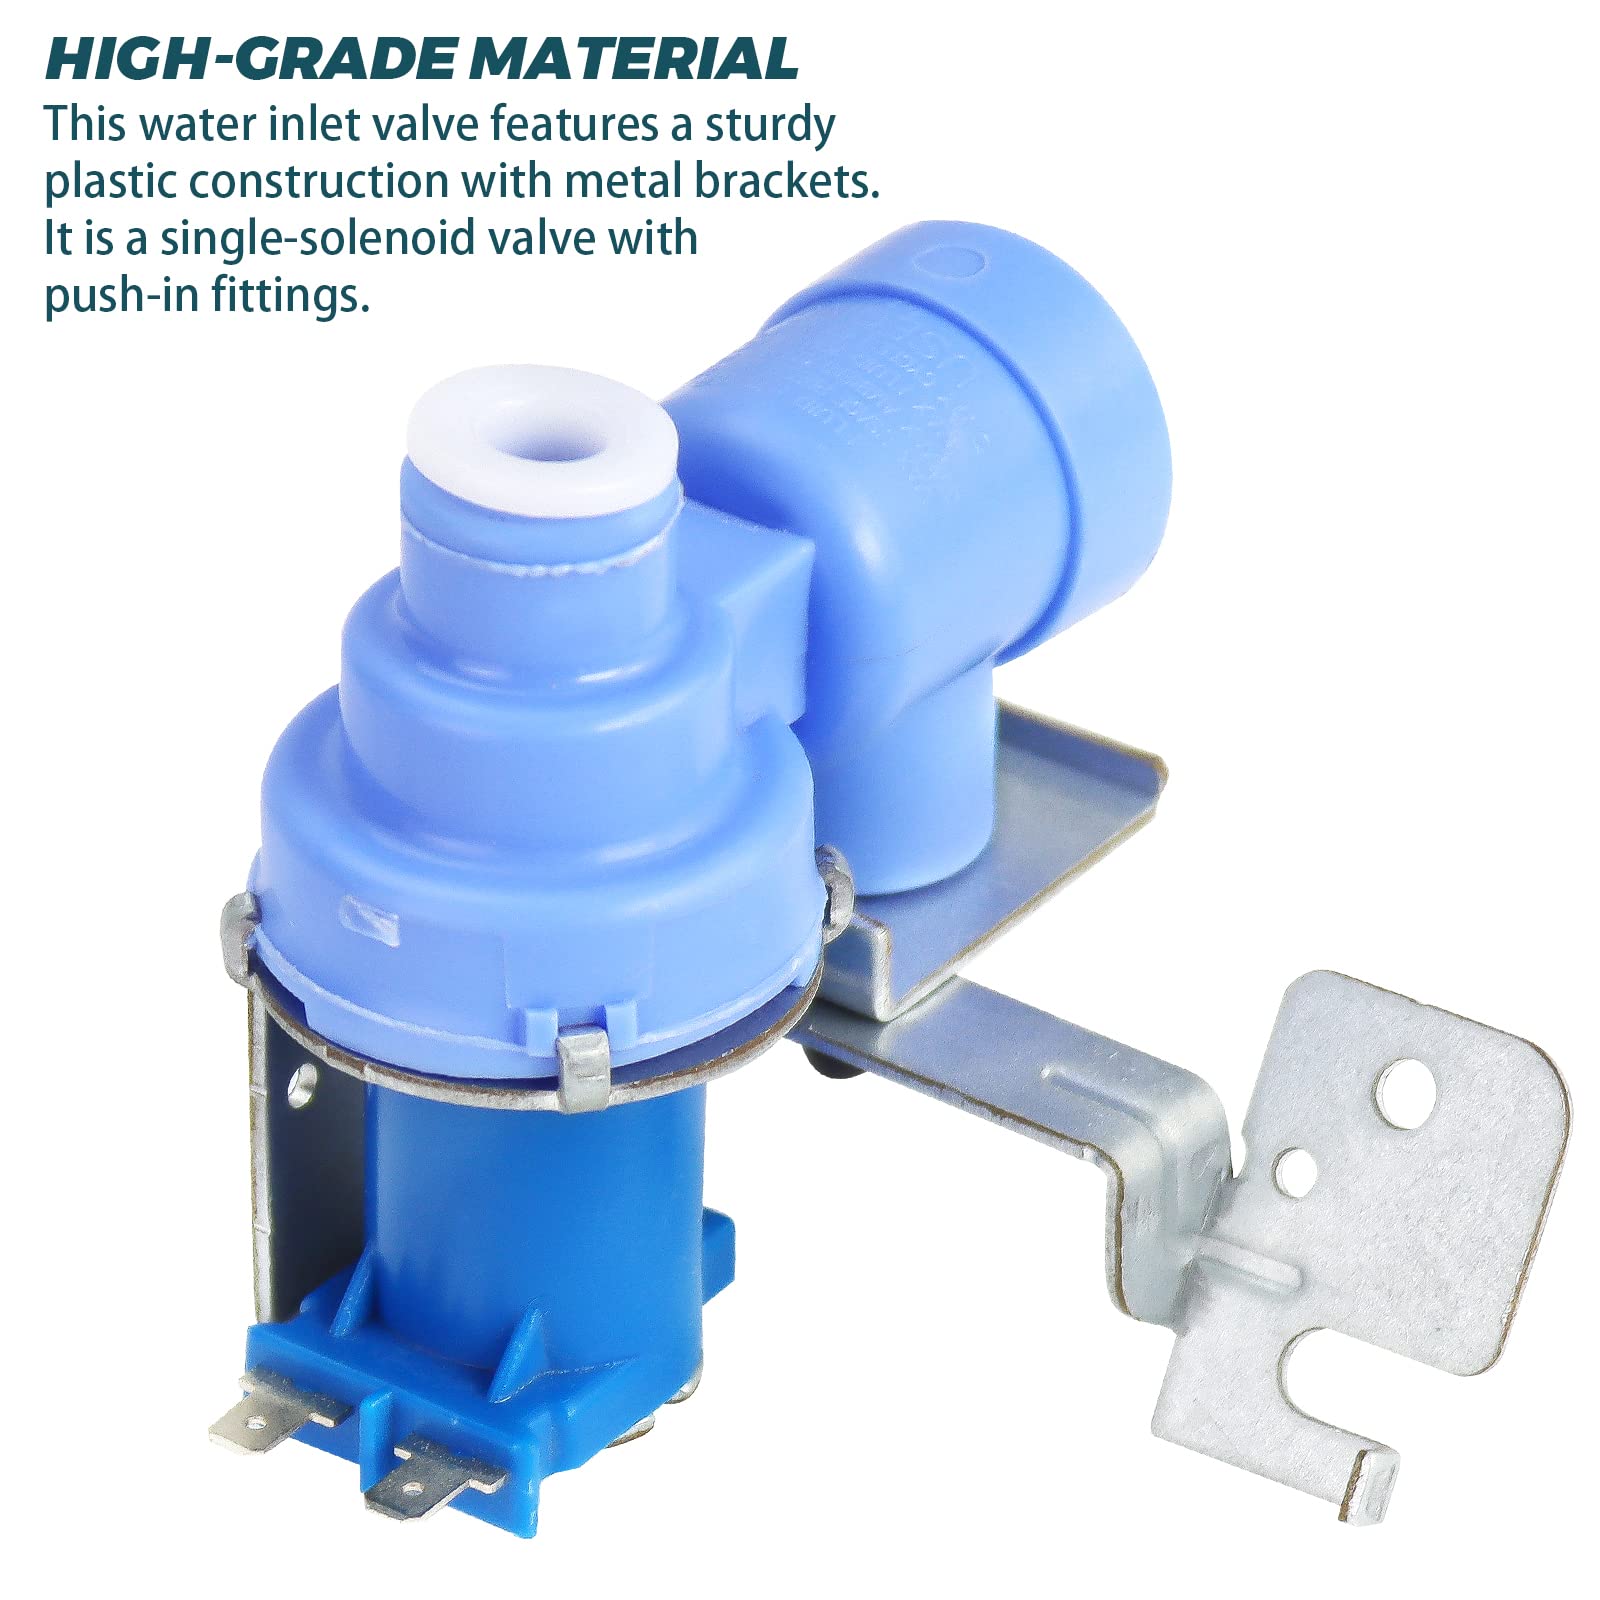 MJX41178908 Refrigerator Water Inlet Valve by Beaquicy Replacement for L-G Ken-more Refrigerator - Replaces 1398828 AP4451762 PS3536019 EAP3536019 79578739802